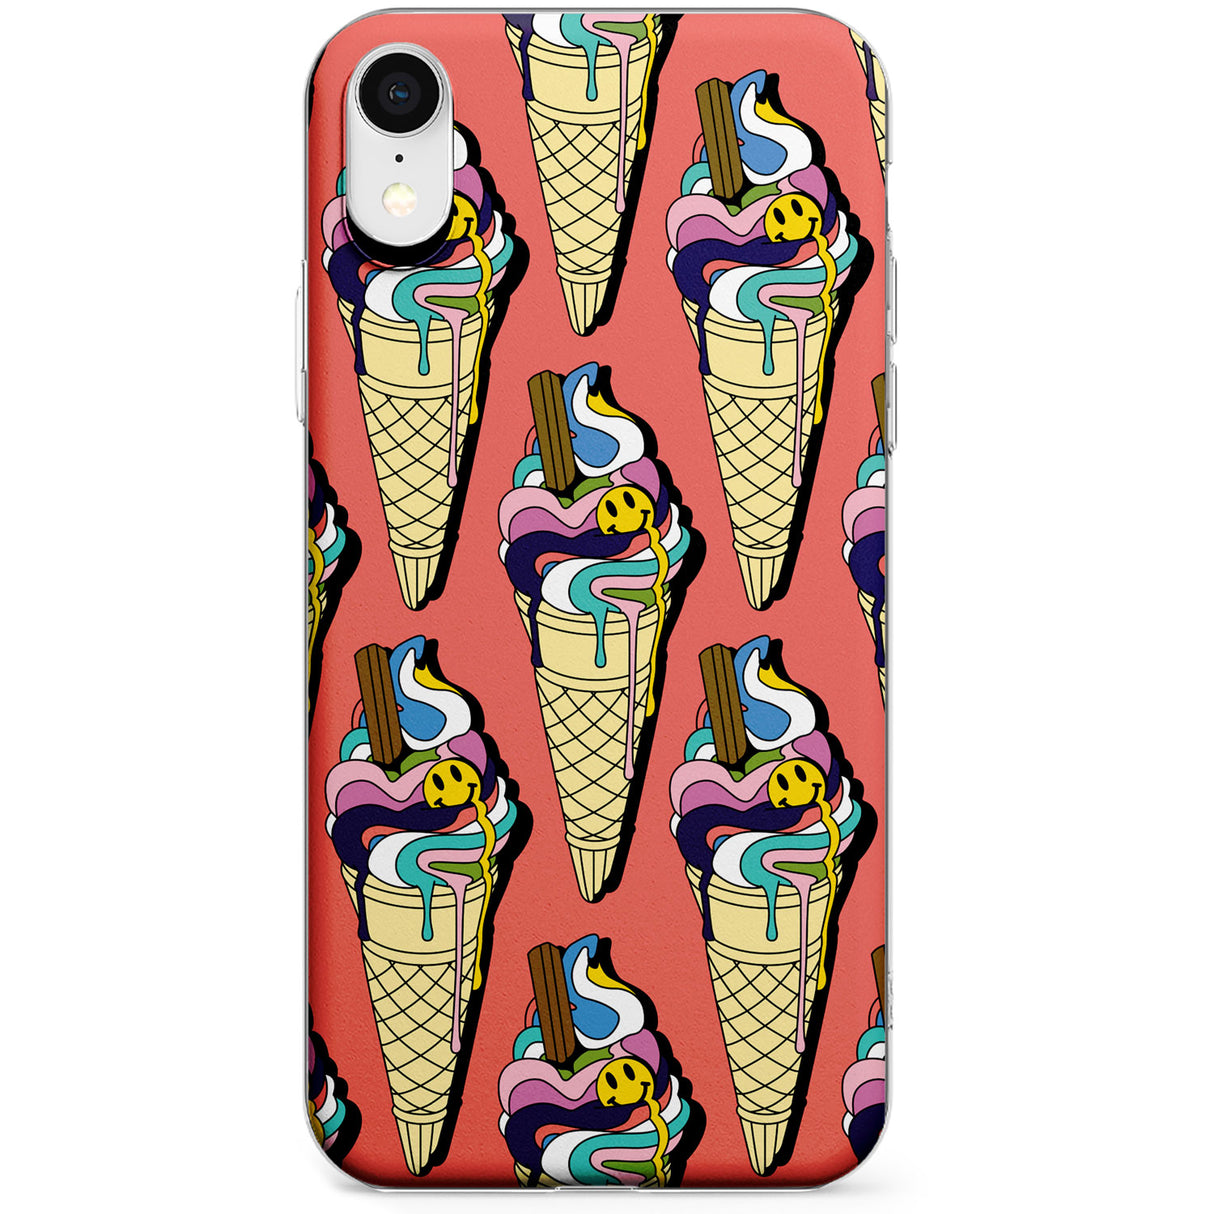 Trip & Drip Ice Cream (Red) Phone Case for iPhone X, XS Max, XR